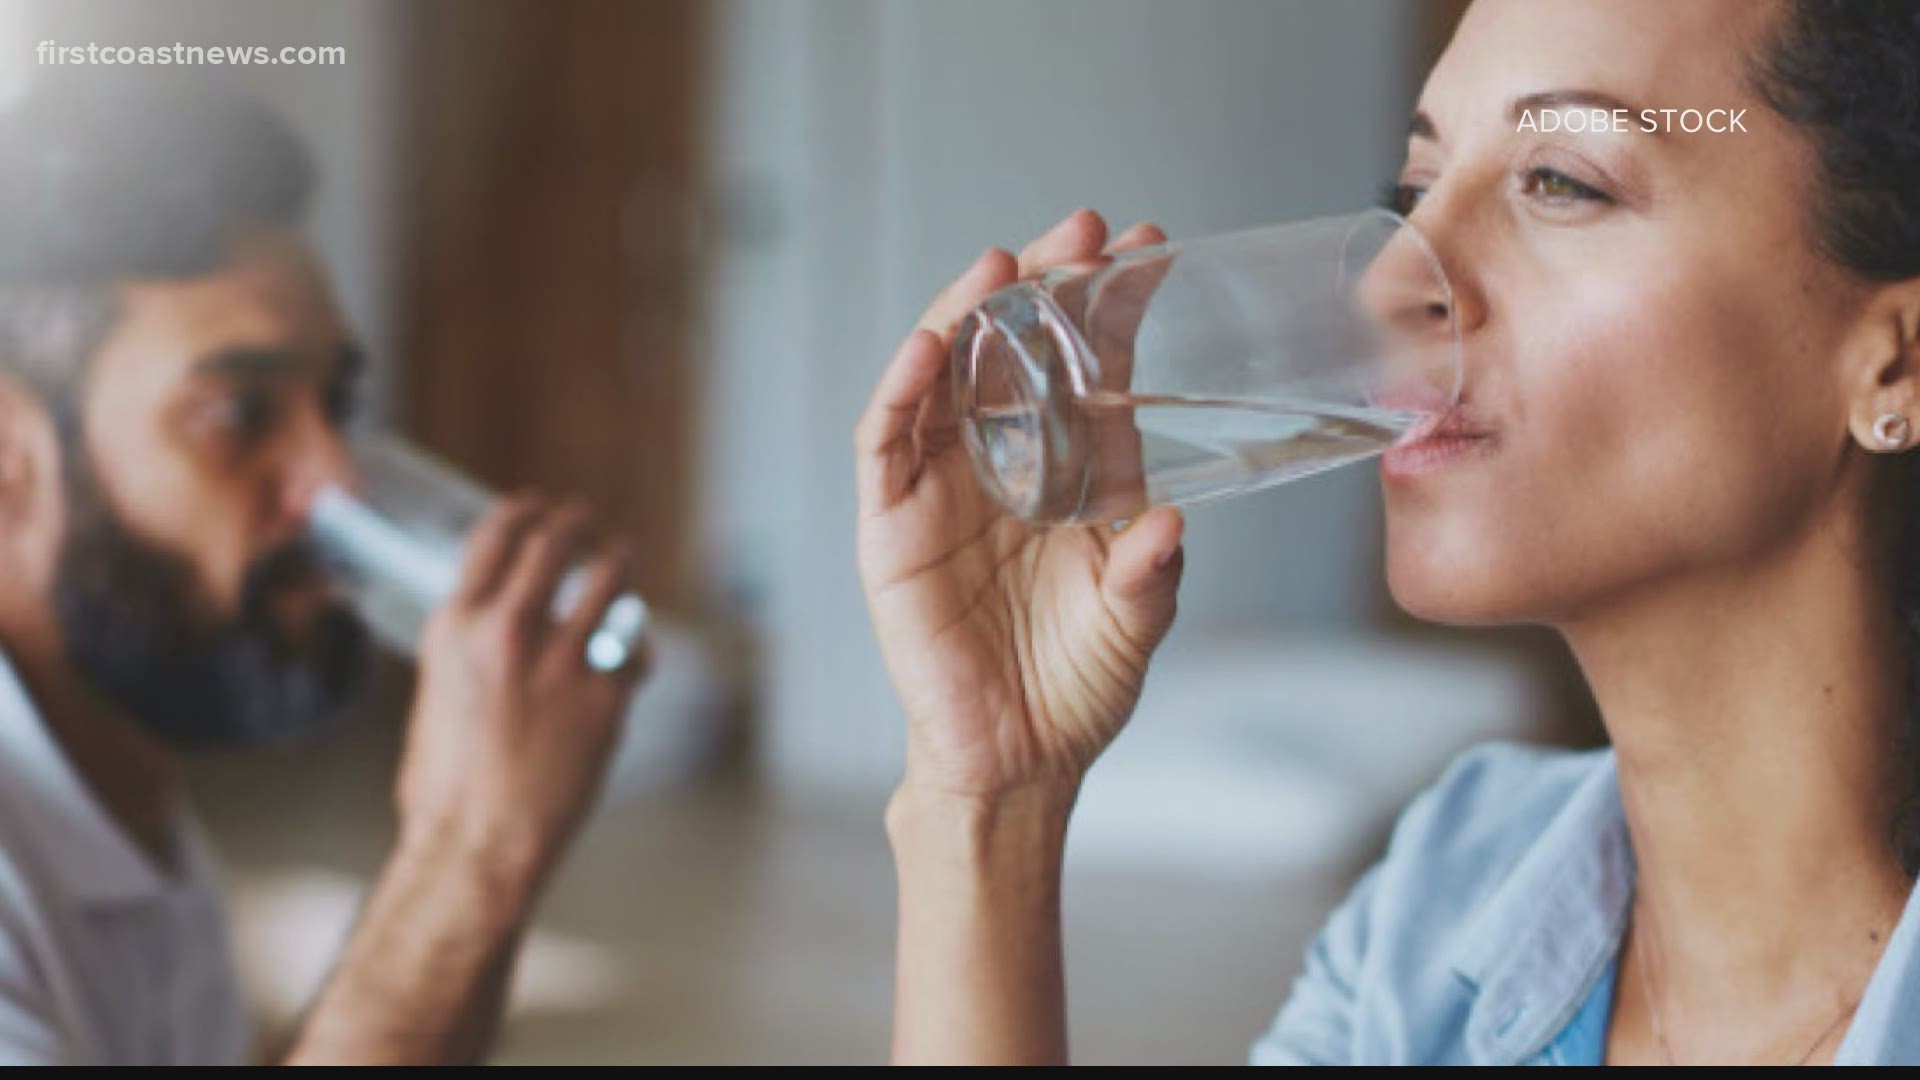 A recent study finds the majority of Americans are chronically dehydrated.